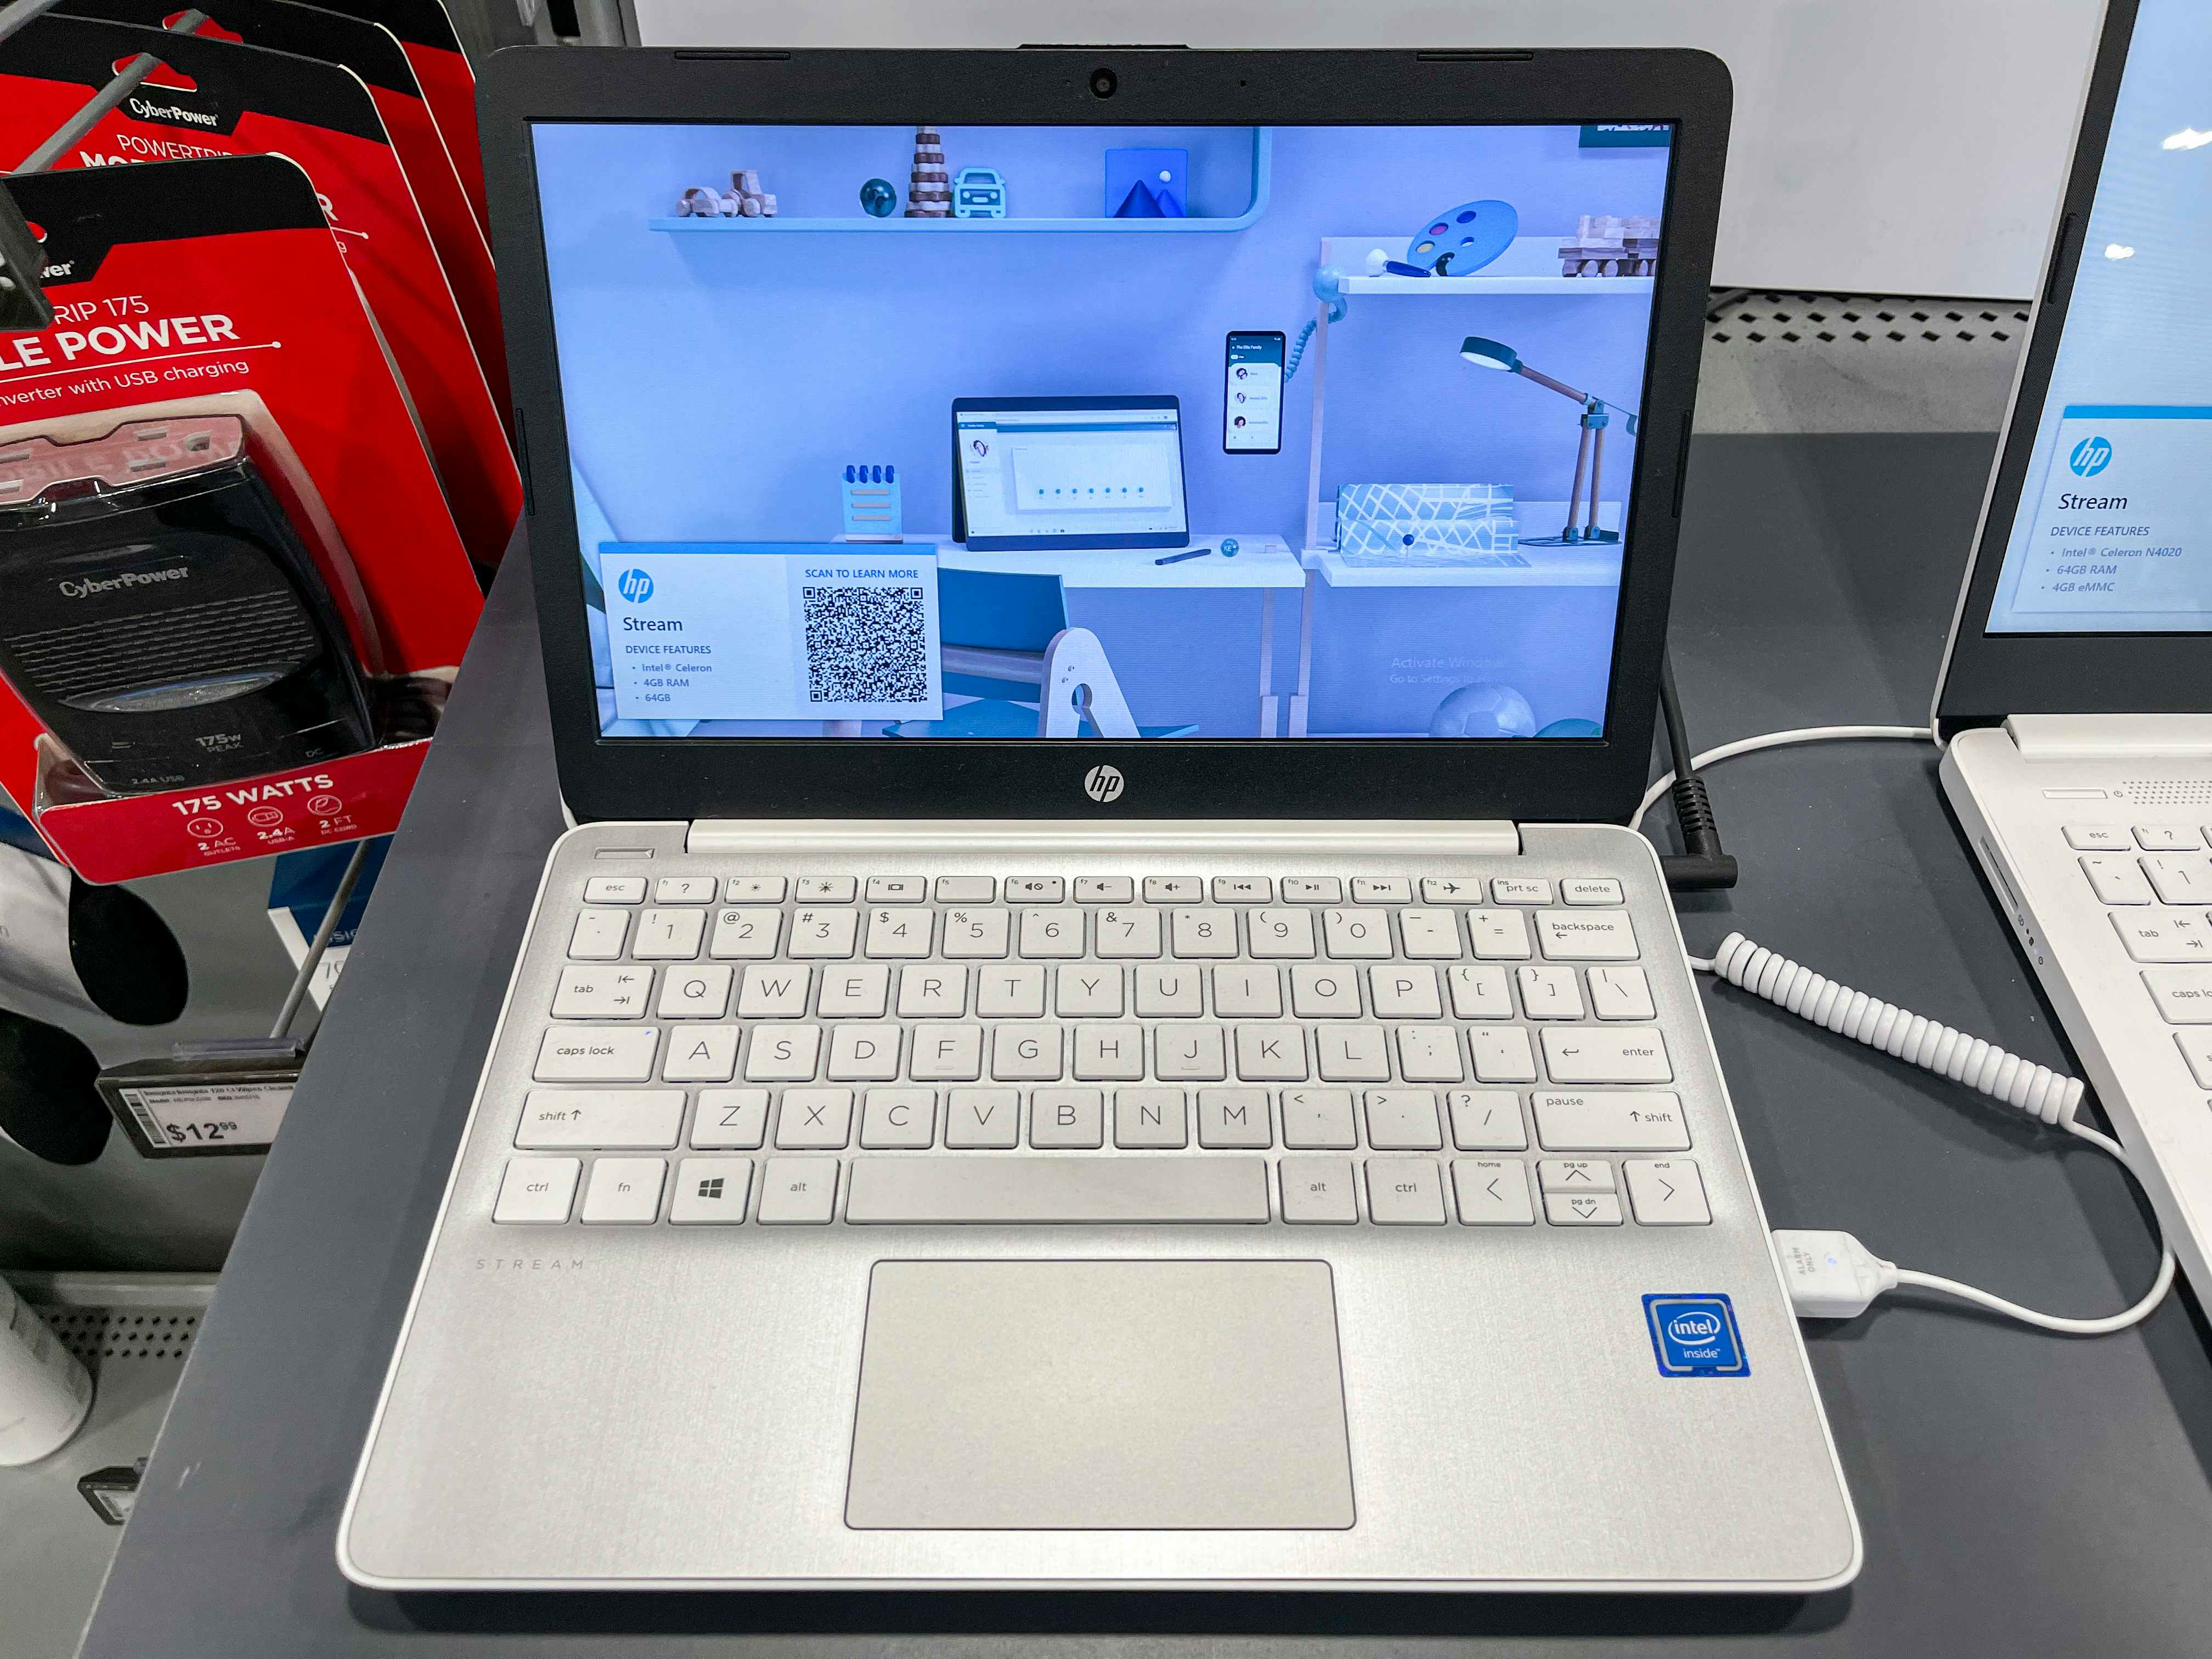 An HP laptop computer for sale at Best Buy